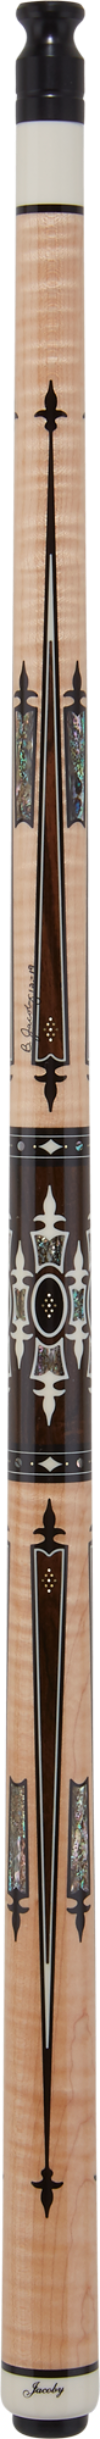 Jacoby JCB17 Pool Cue -Jacoby